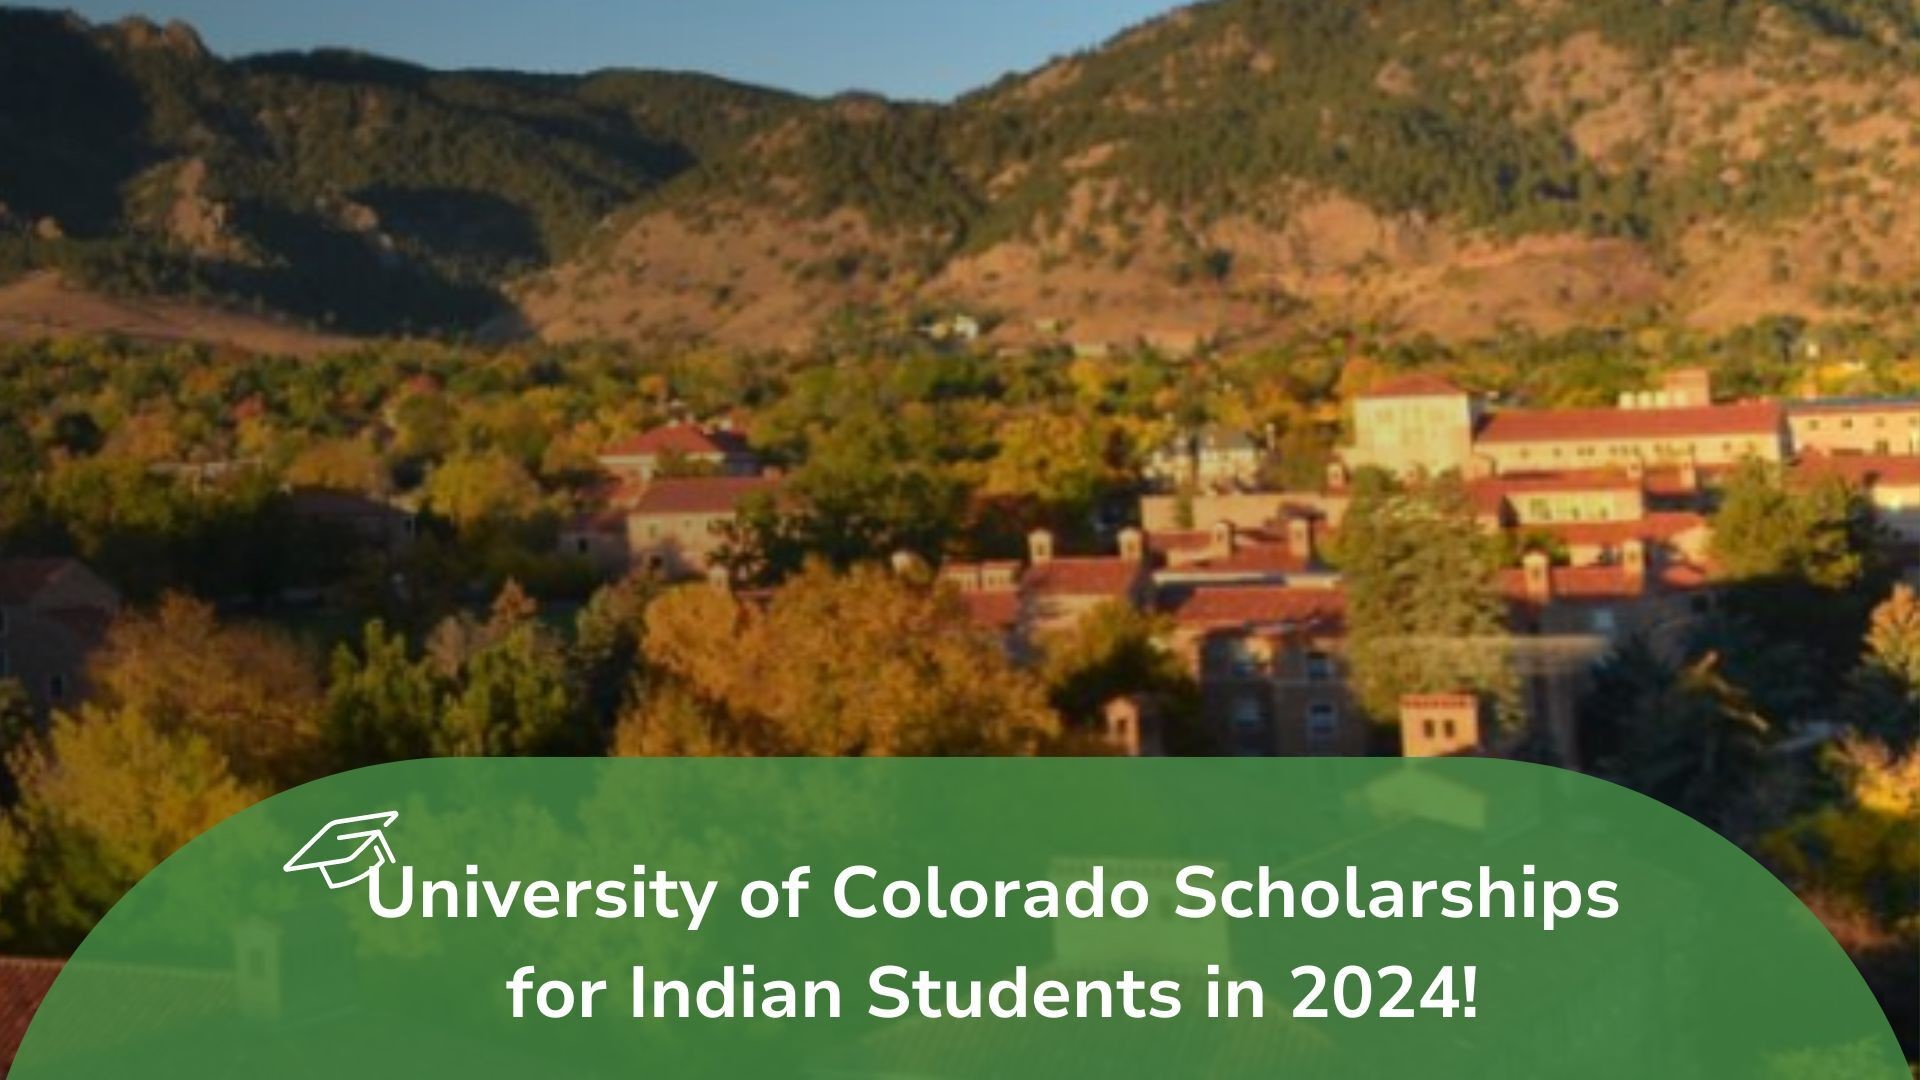 university of colorado scholarships for Indian students 2024